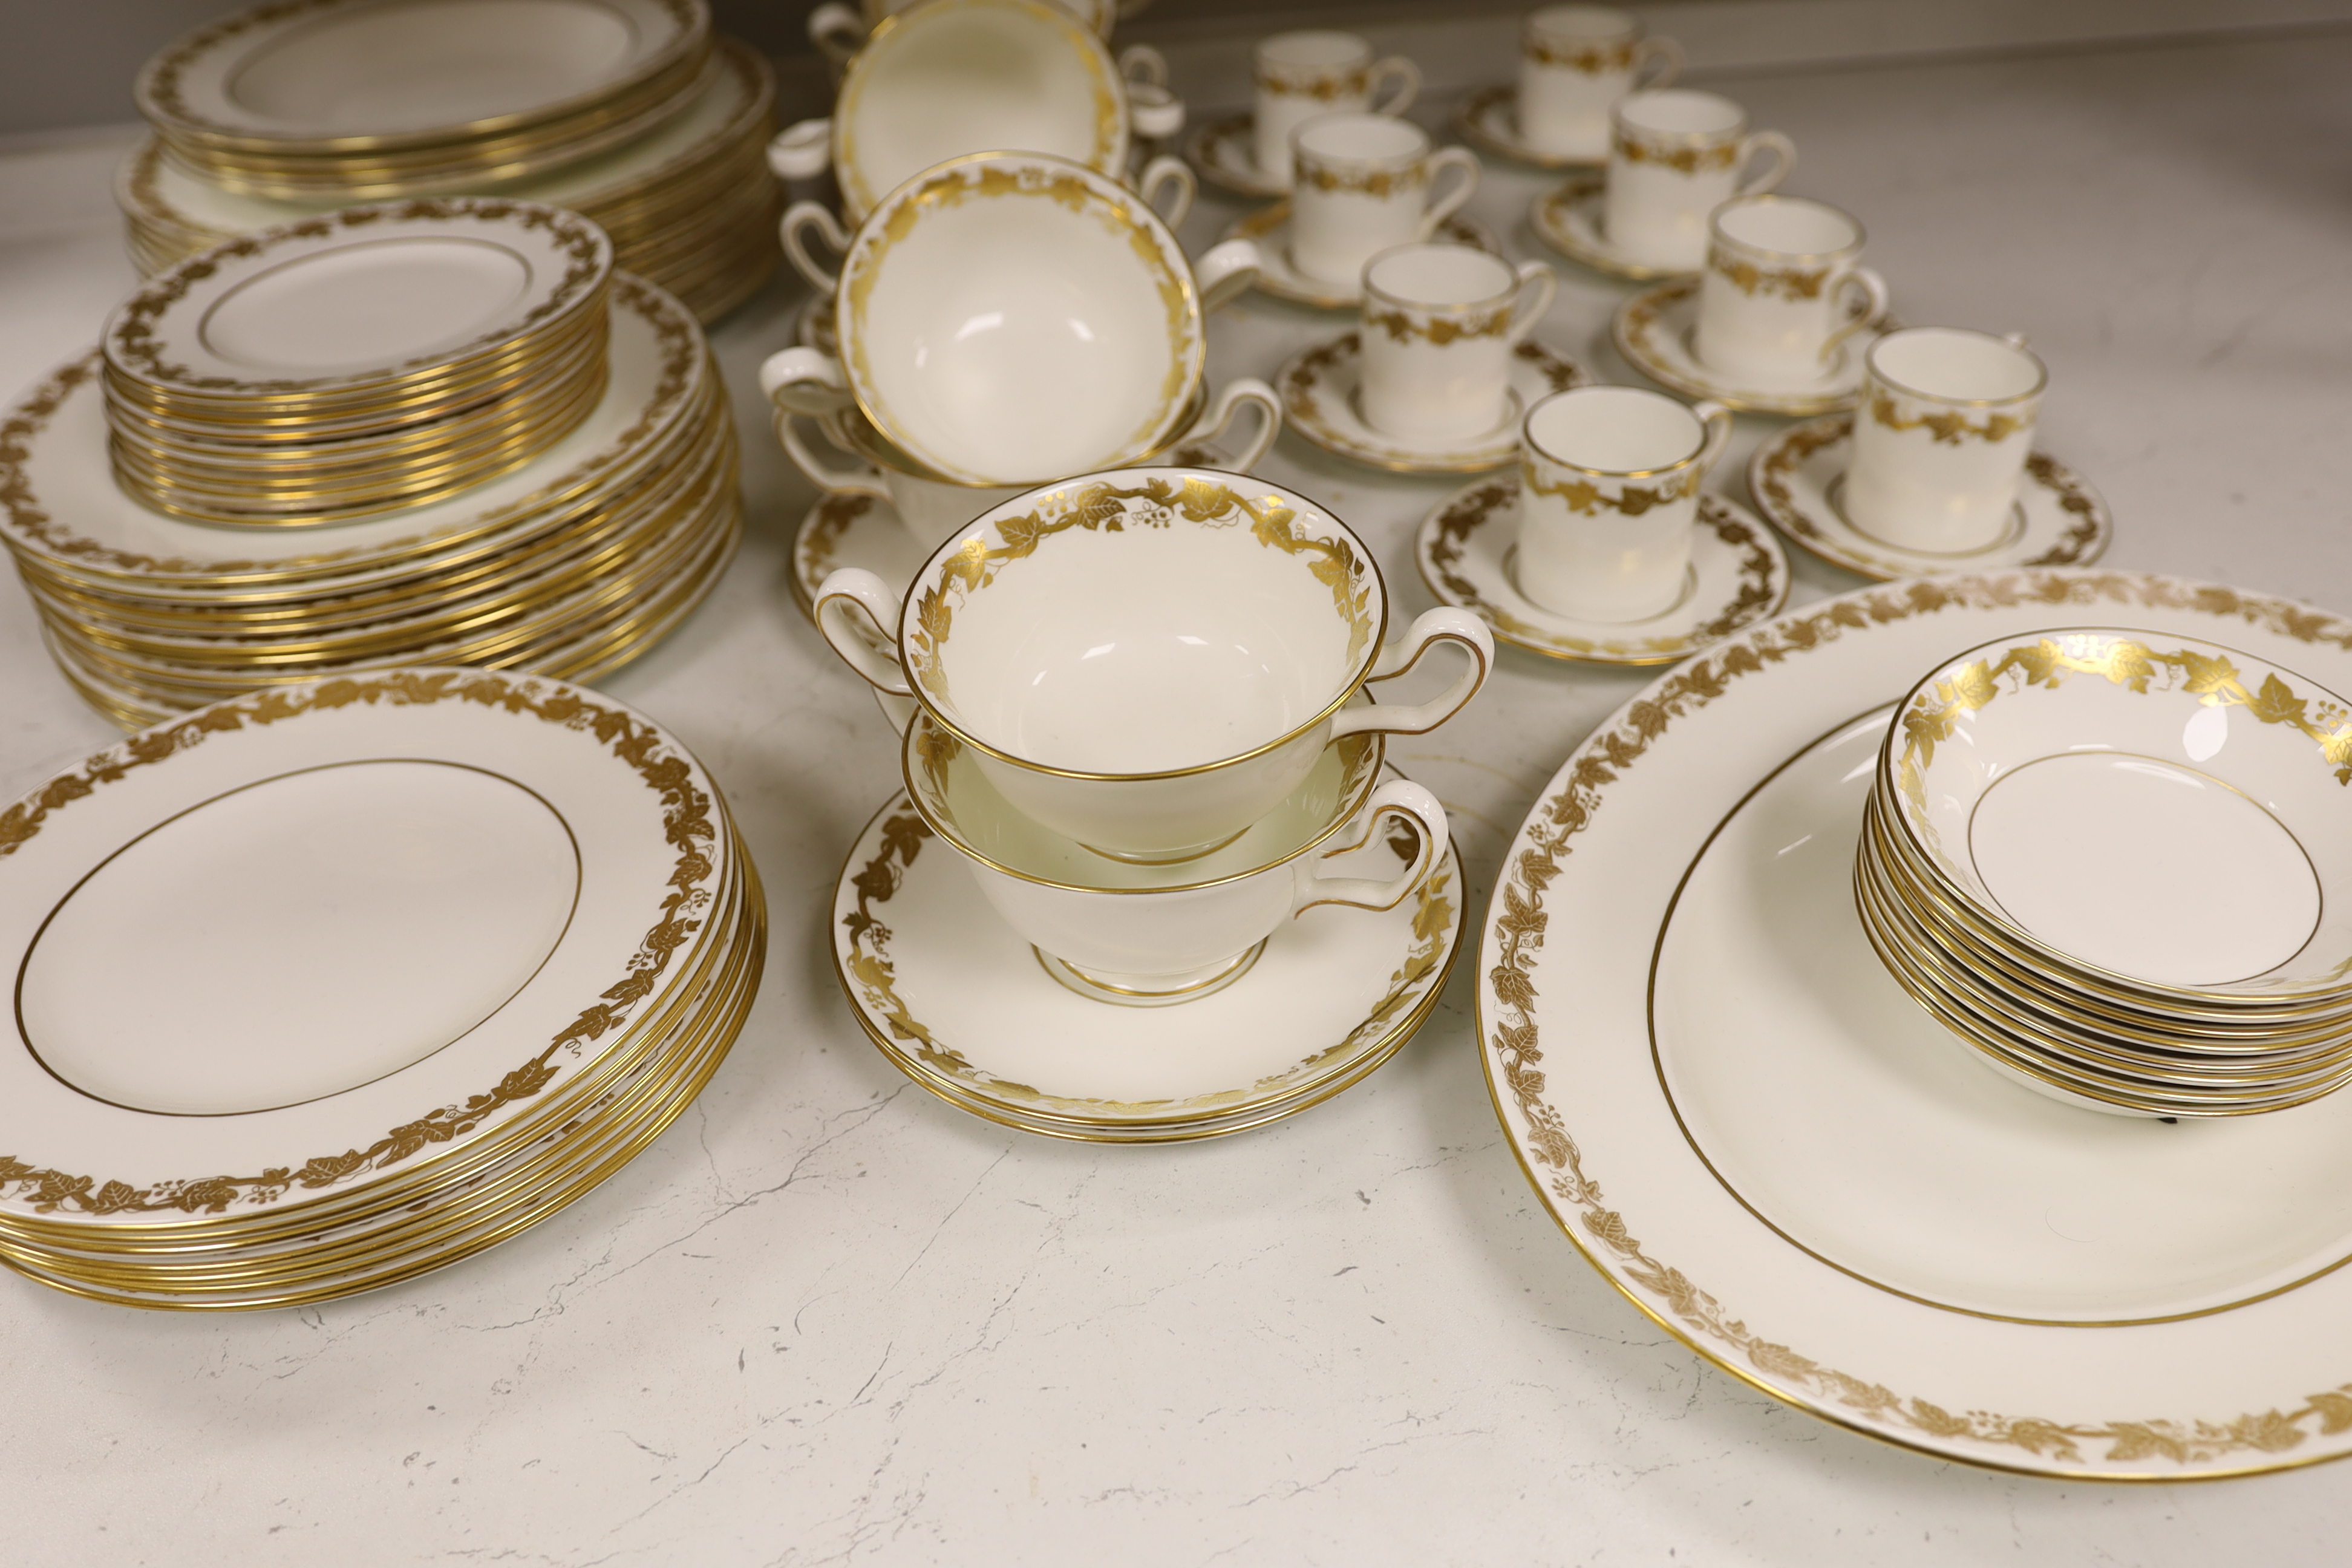 A Wedgwood gilt vine pattern dinner and coffee service for twelve